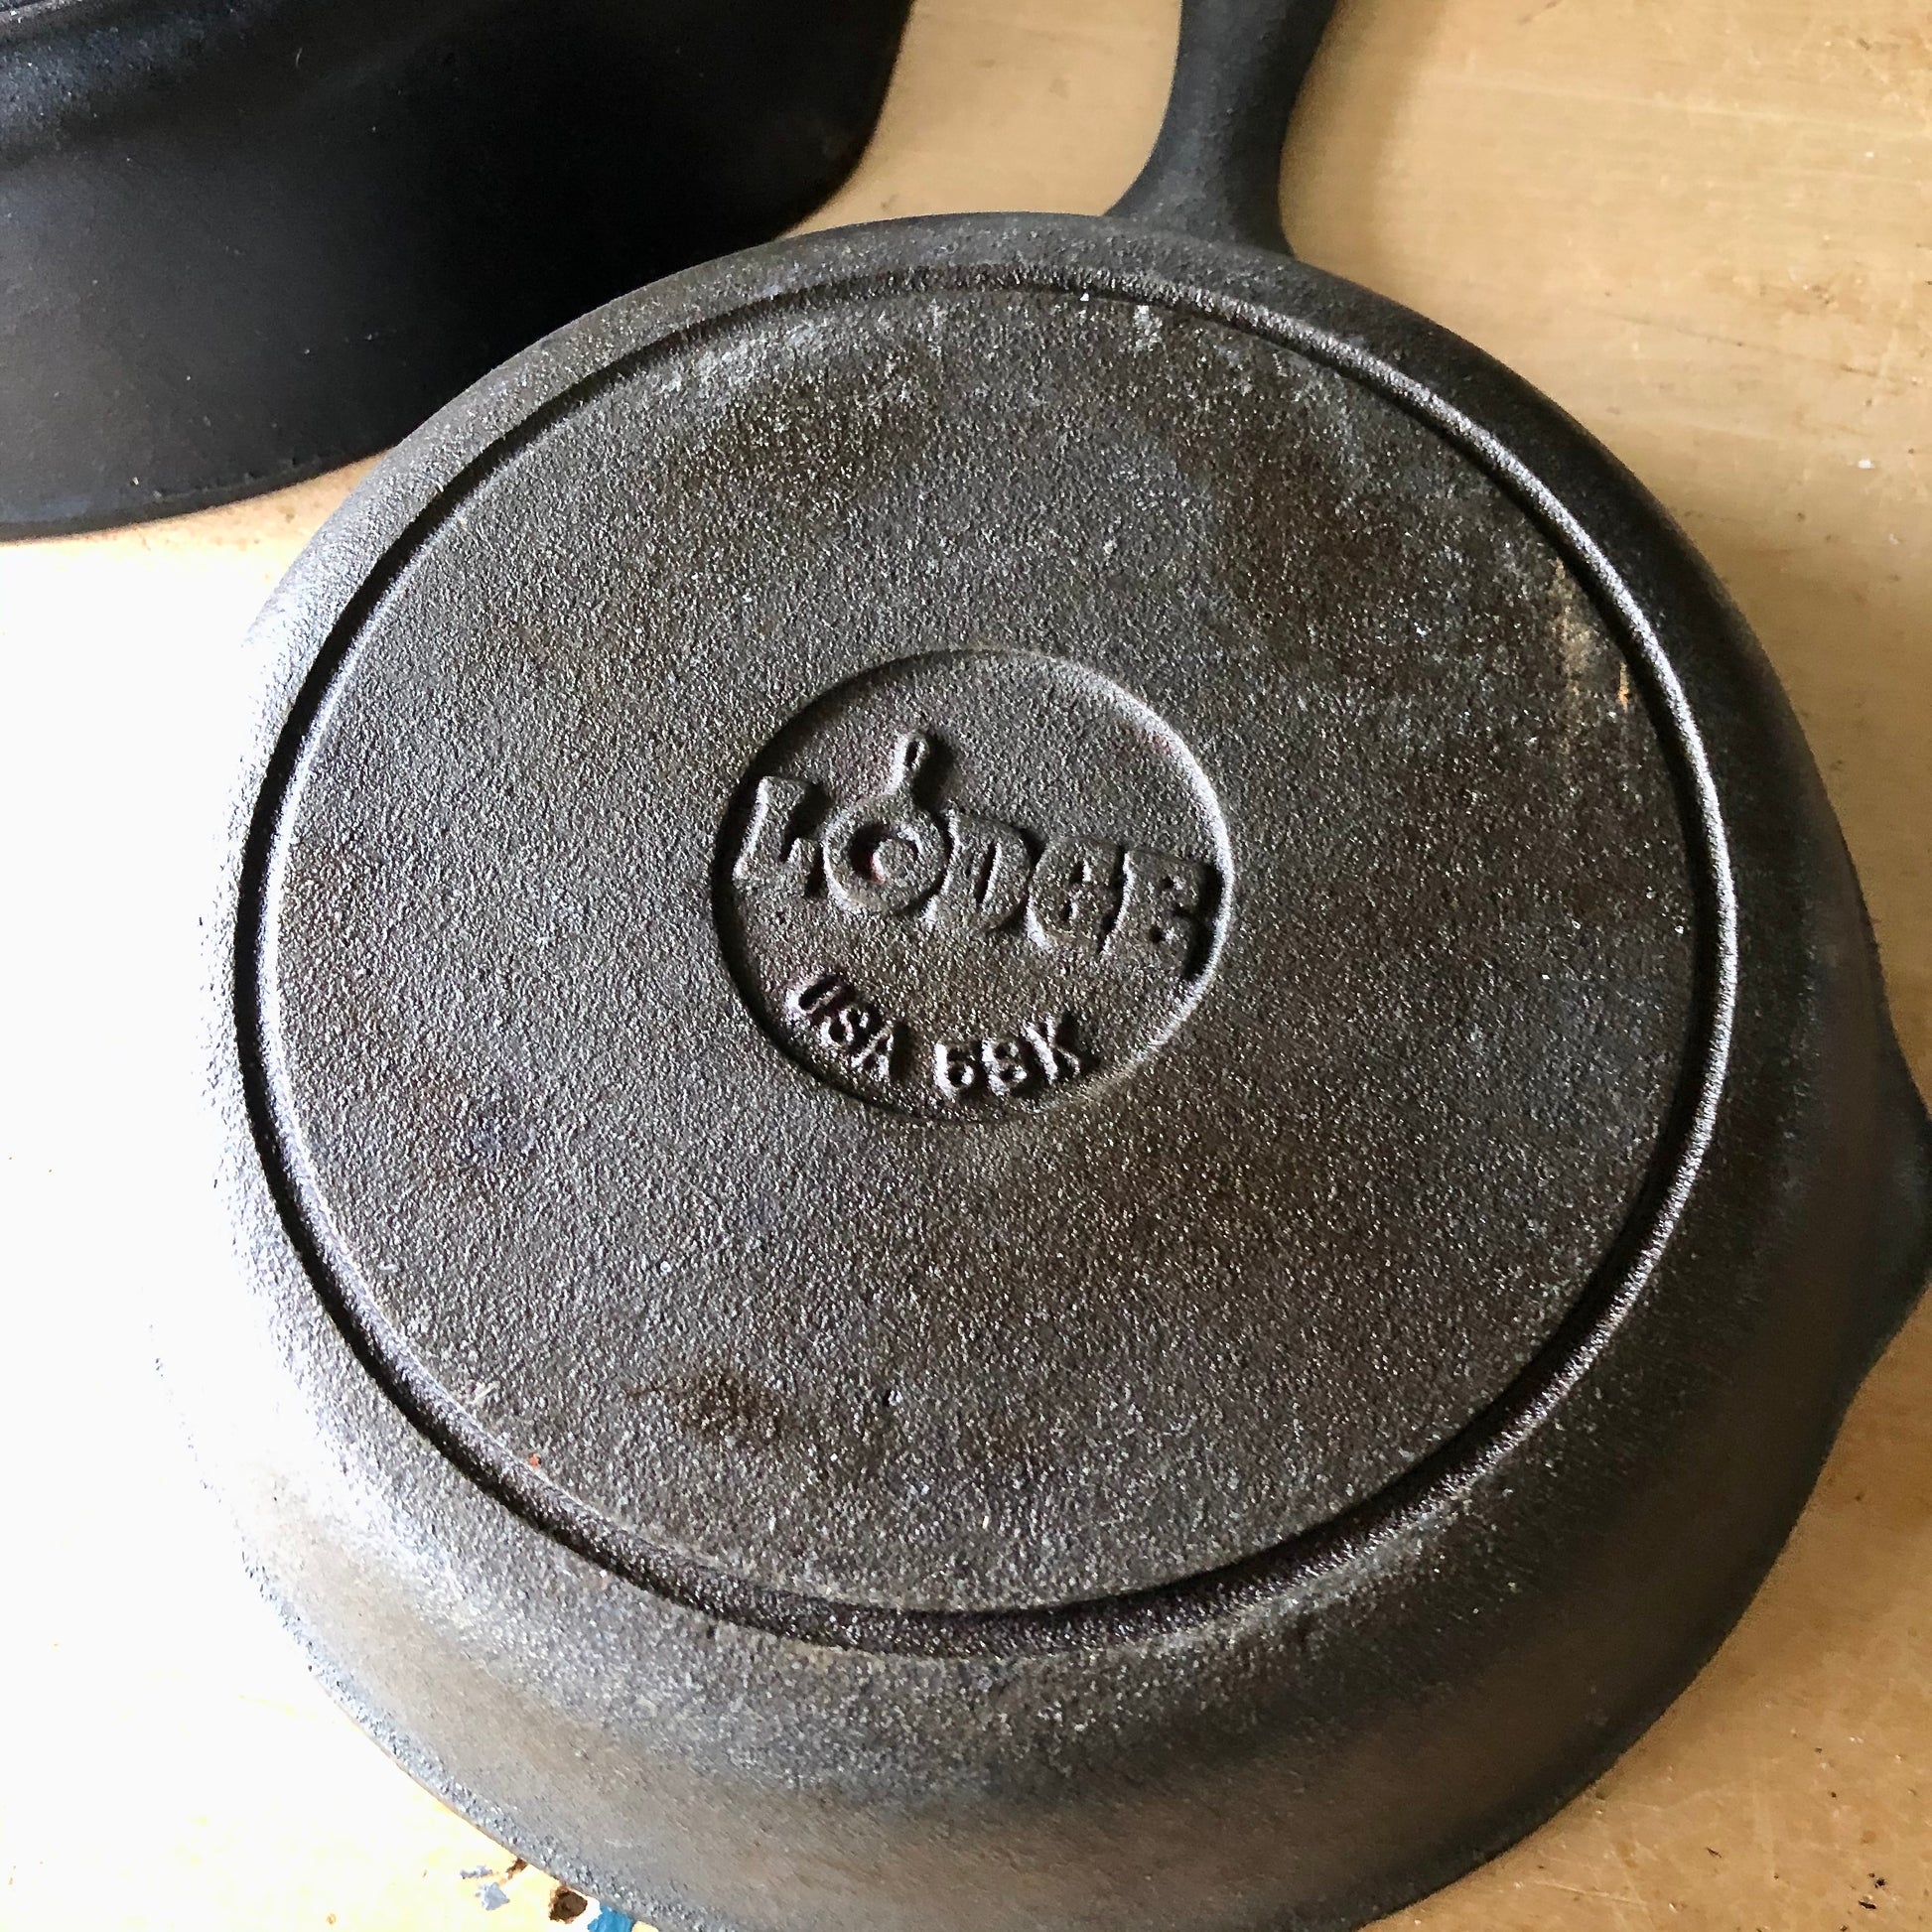 LODGE 13 CAST IRON SKILLET - Earl's Auction Company